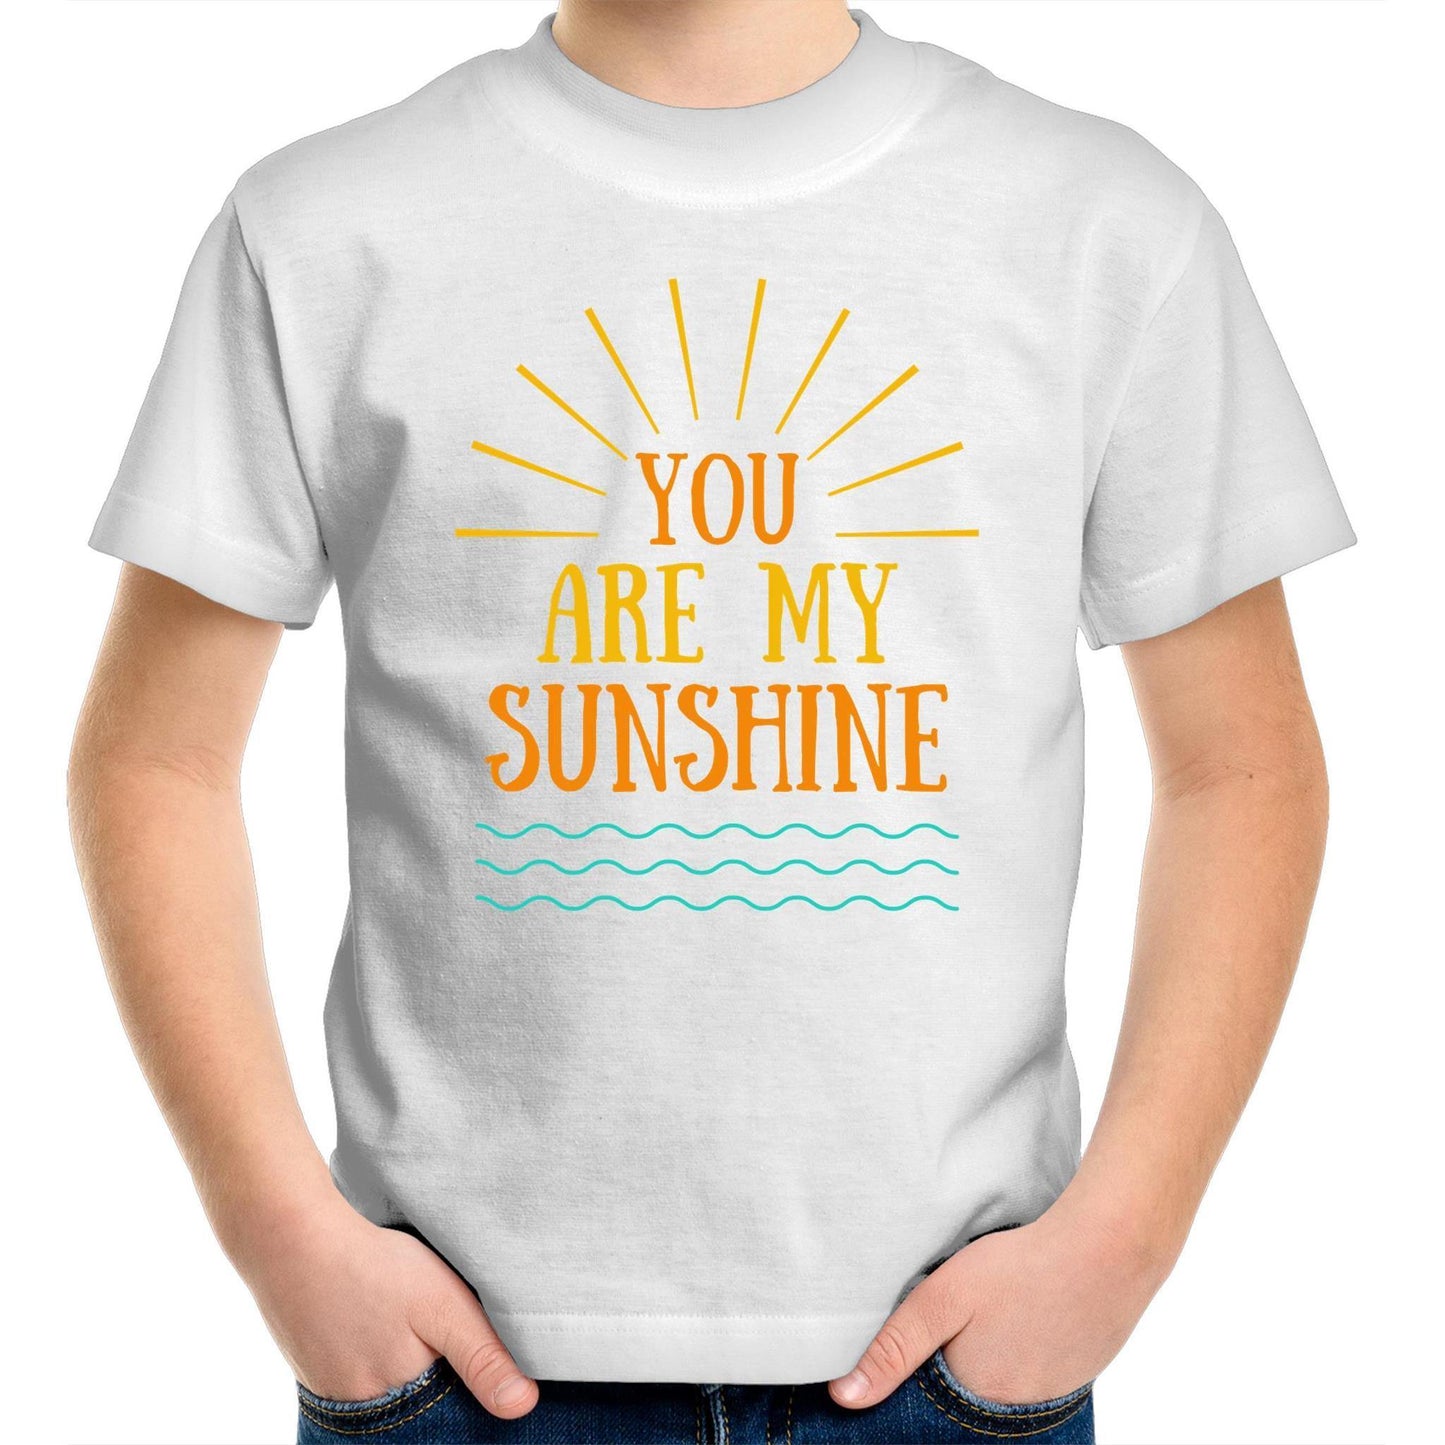 You Are My Sunshine - Kids Youth Crew T-Shirt White Kids Youth T-shirt Summer